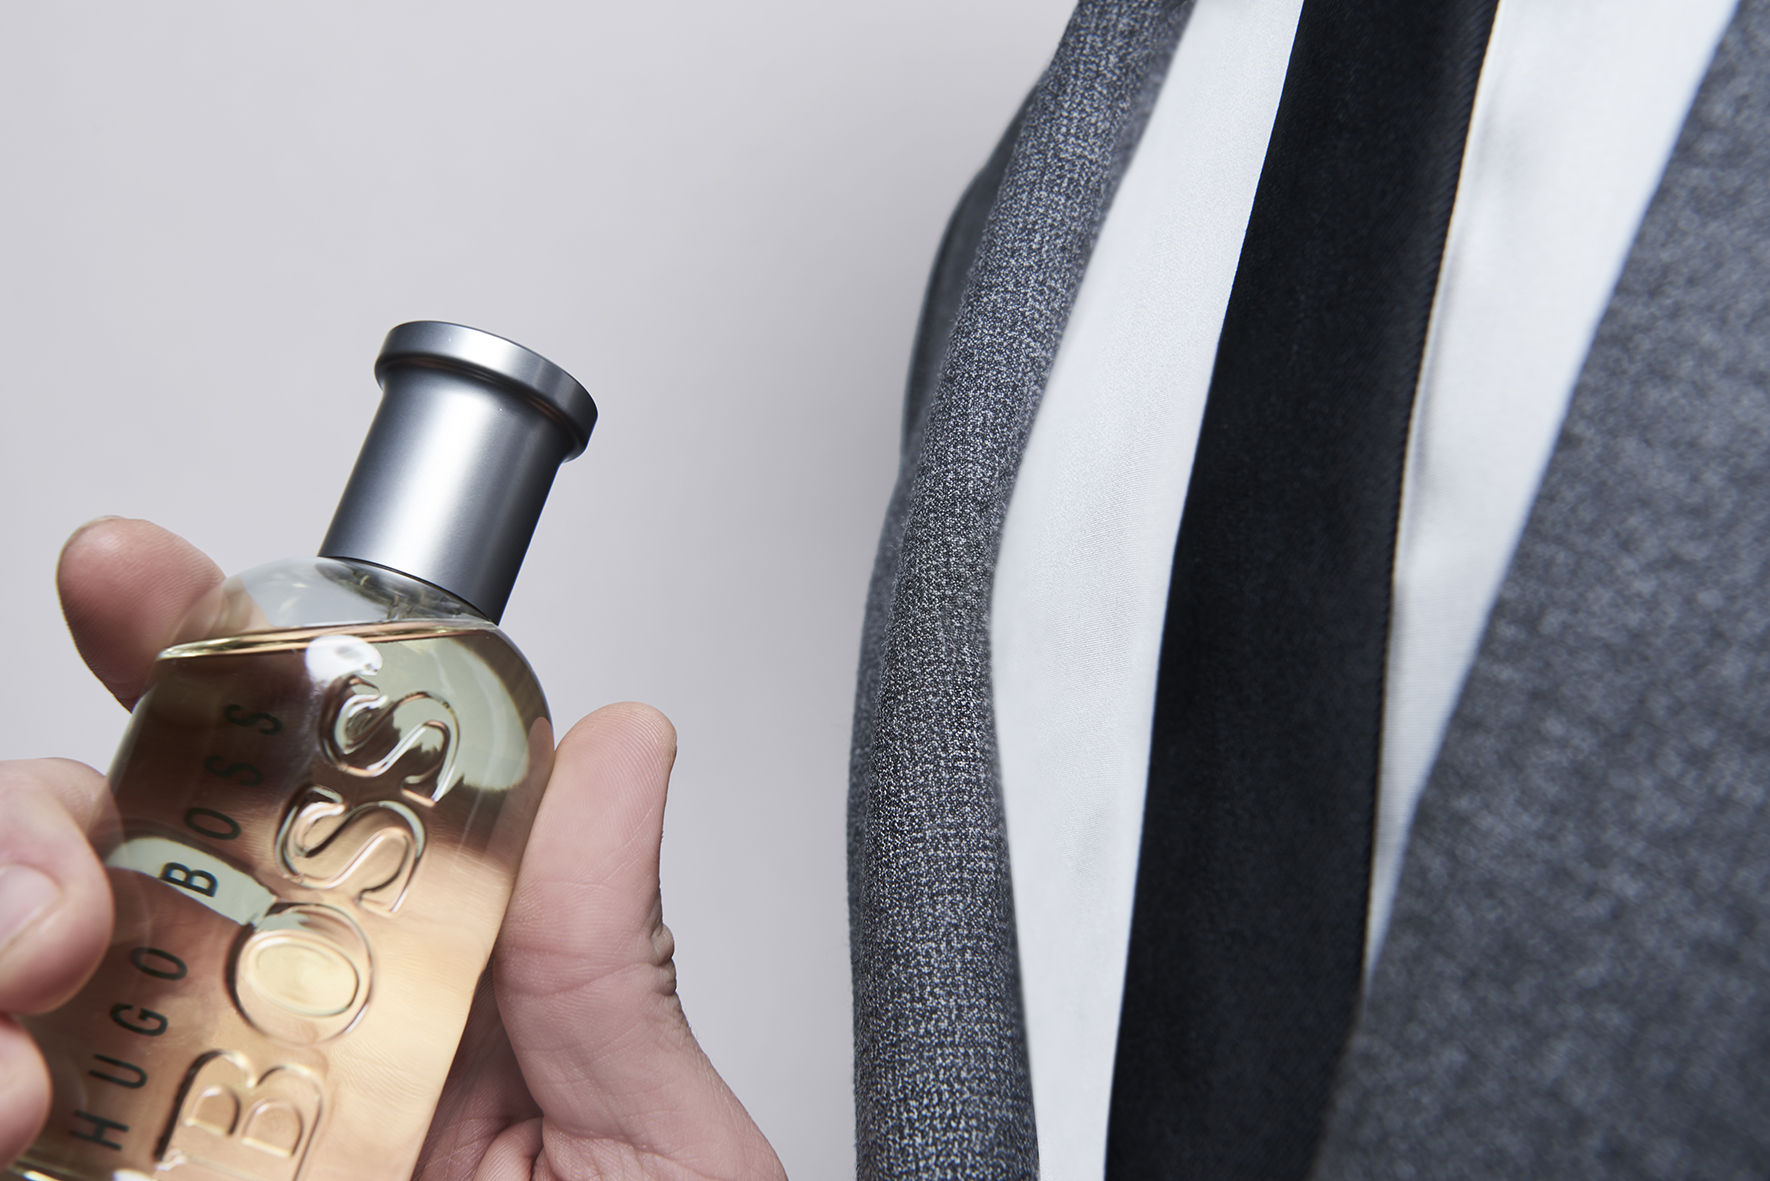 Channel the Man of Today with the timeless BOSS Bottled fragrance